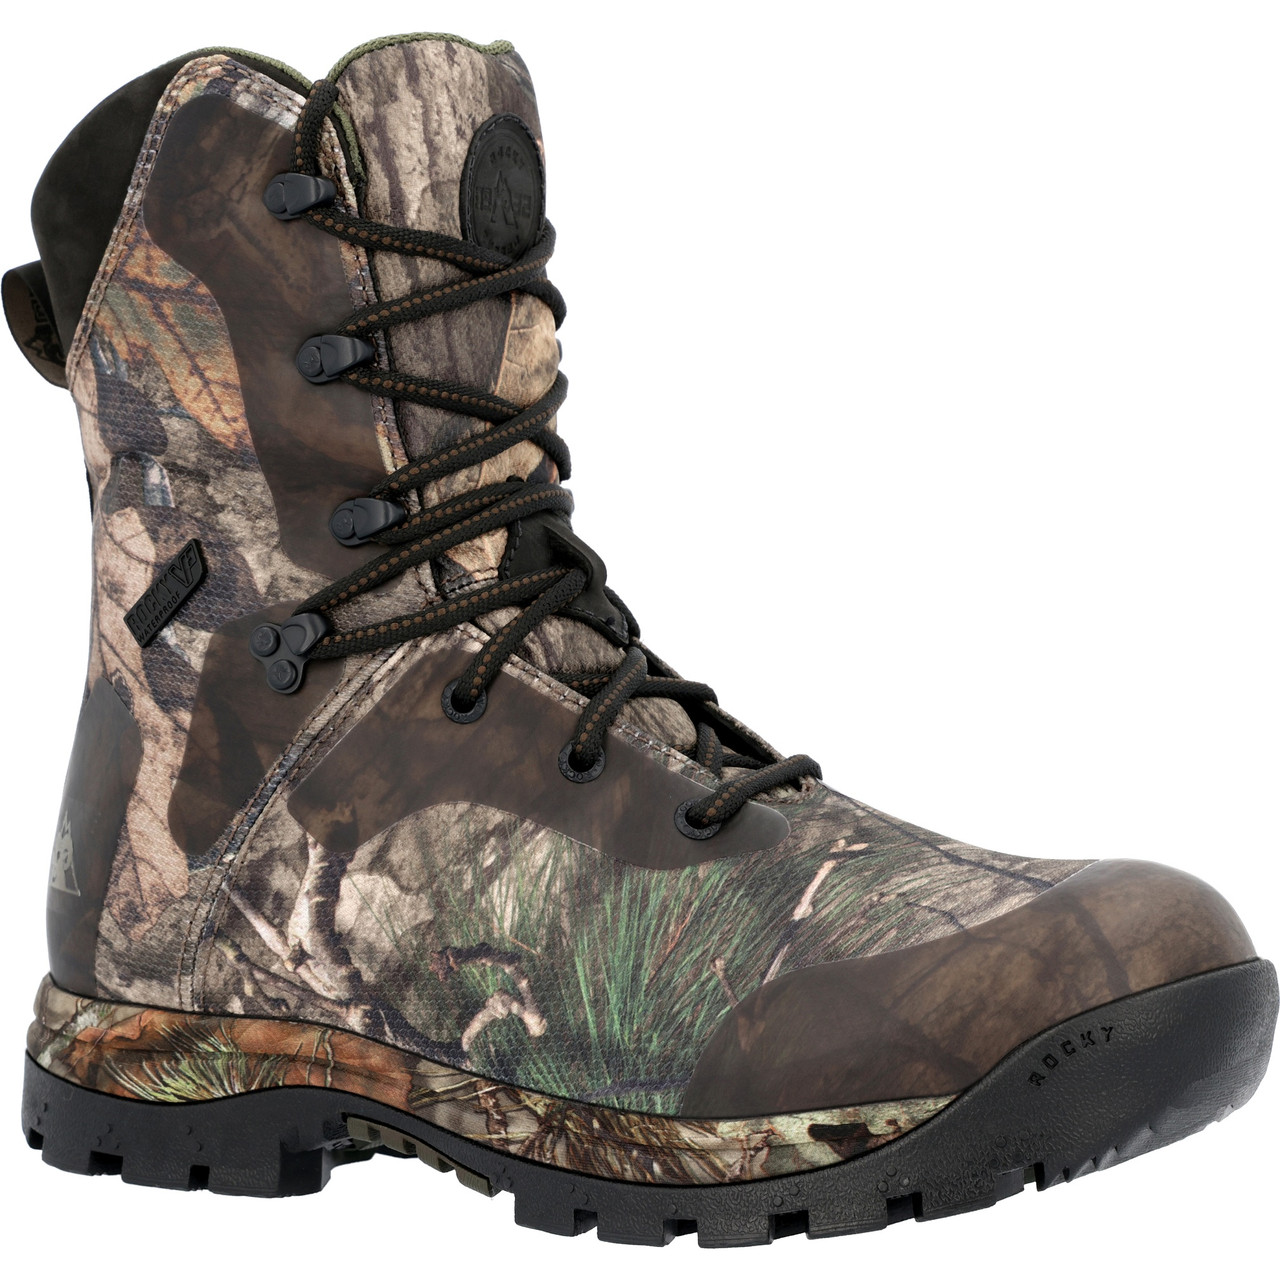 ROCKY LYNX 1000G INSULATED OUTDOOR BOOTS RKS0627